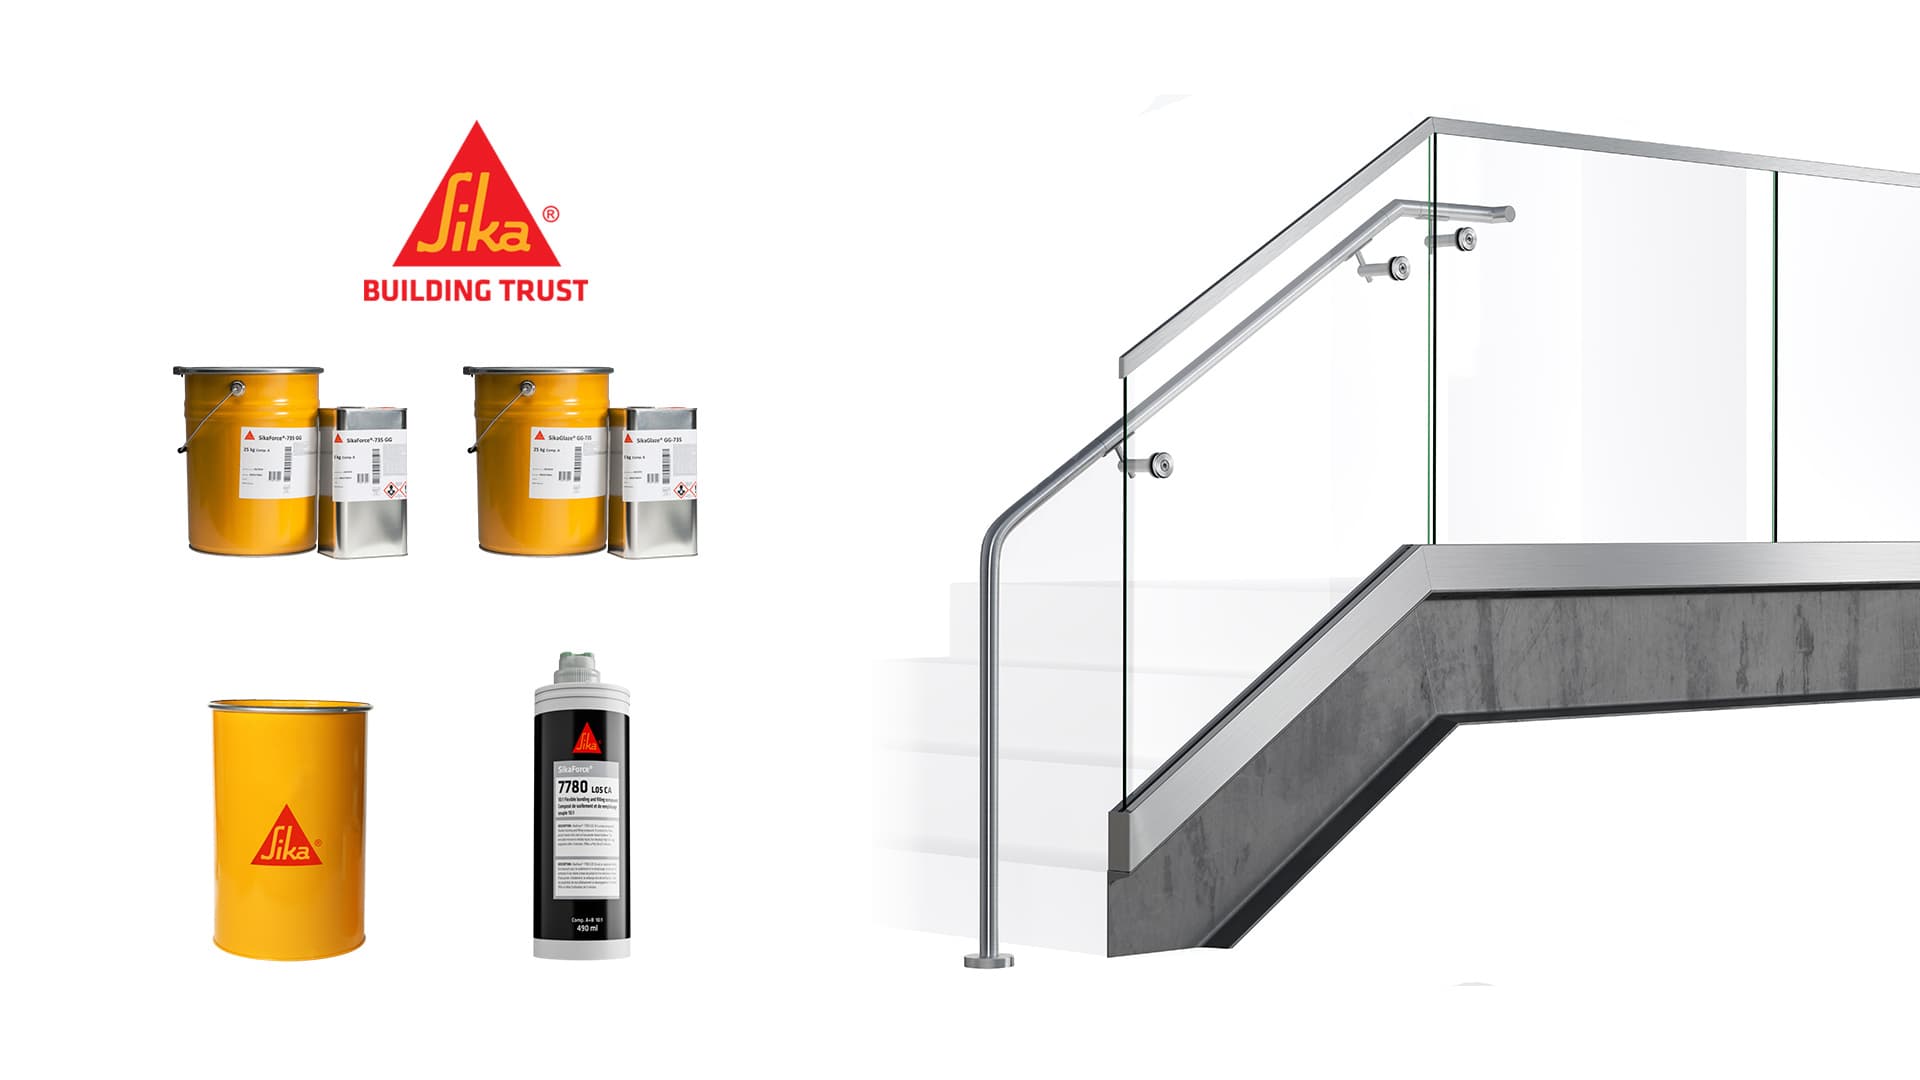 Sika building trust products 1920x1080 2